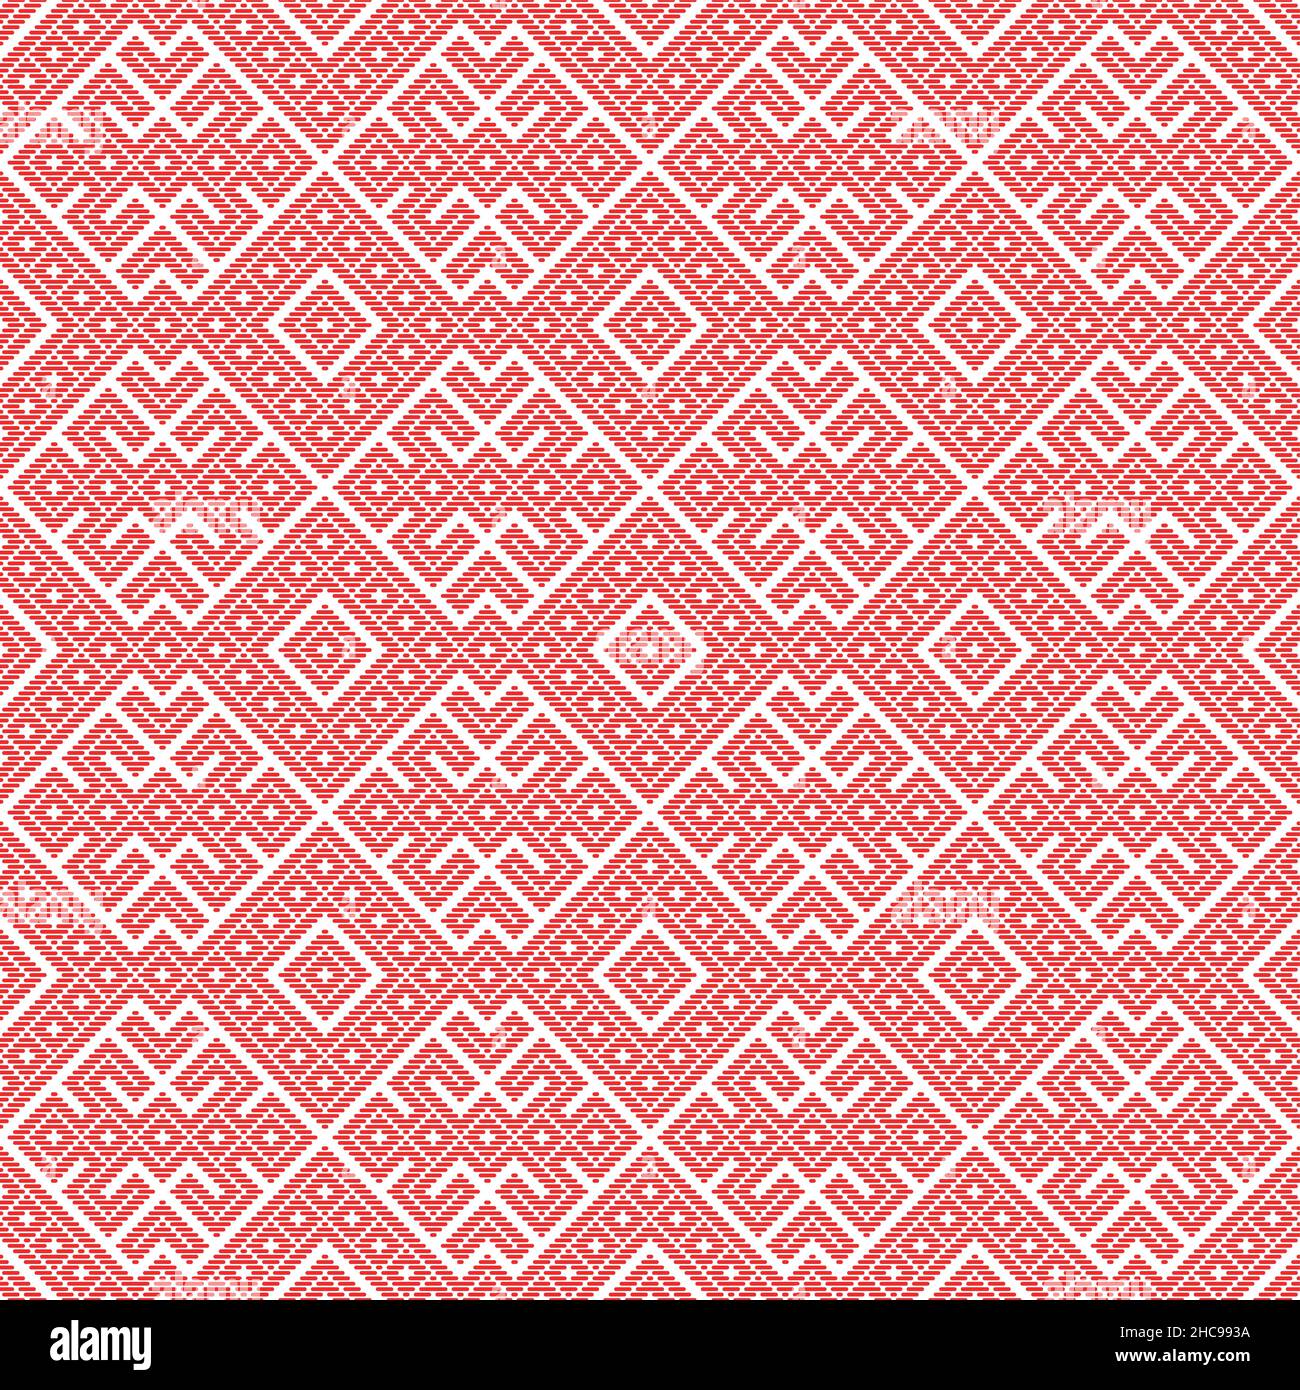 Seamless pattern based on traditional Russian and slavic ornament made by lines Stock Vector